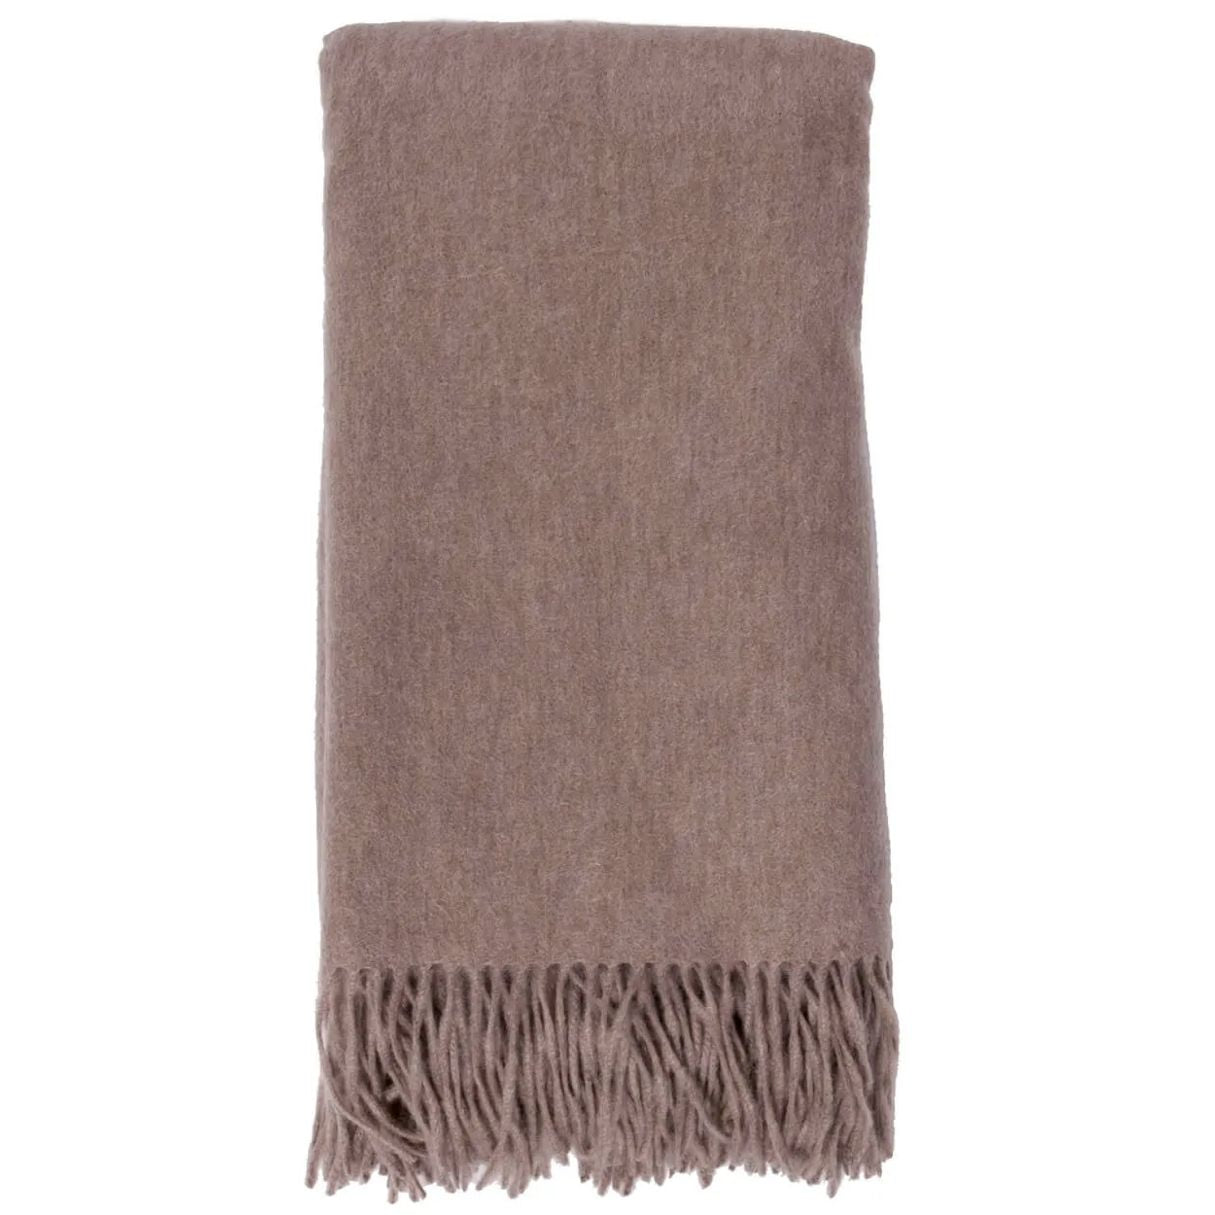 100% Cashmere Essential Throw (Choice of Colors) by Alashan Cashmere